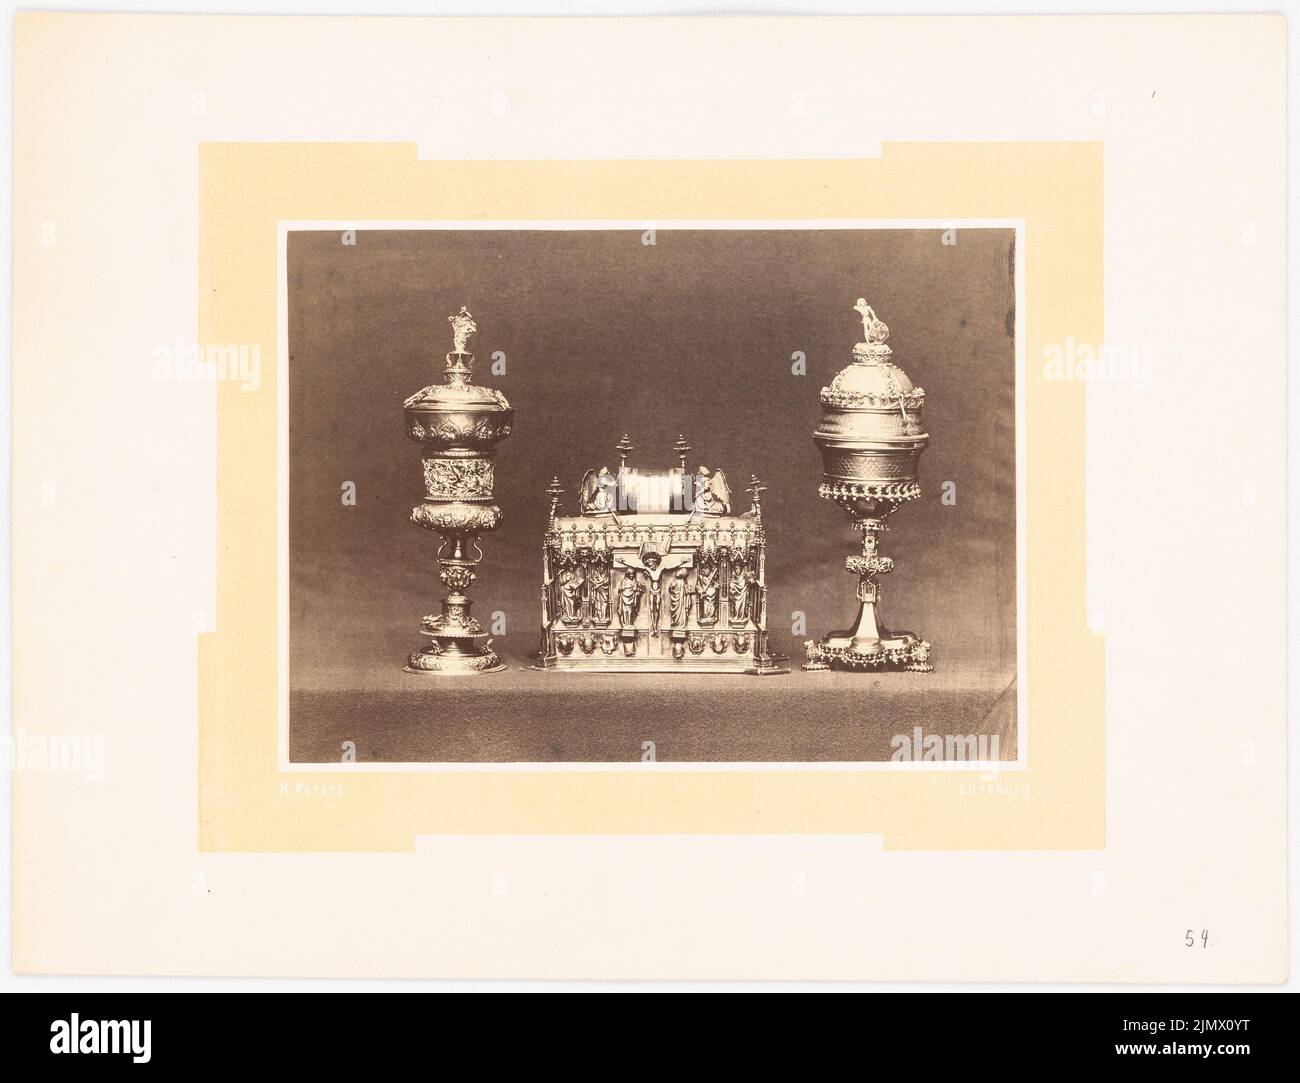 Quast Ferdinand von (1807-1877), three devices from the city of Lüneburg's council, so-called Lüneburg silver treasure (without date): Two cups, a small relics in the middle (from: The art treasures of the town hall in Lüneburg, see back ). S/W photo on paper on cardboard, printed passportout, 24.8 x 32.5 cm (including scan edges) Quast Ferdinand von  (1807-1877): Drei Geräte aus dem Ratssilberzeug der Stadt Lüneburg, sog. Lüneburger Silberschatz Stock Photo